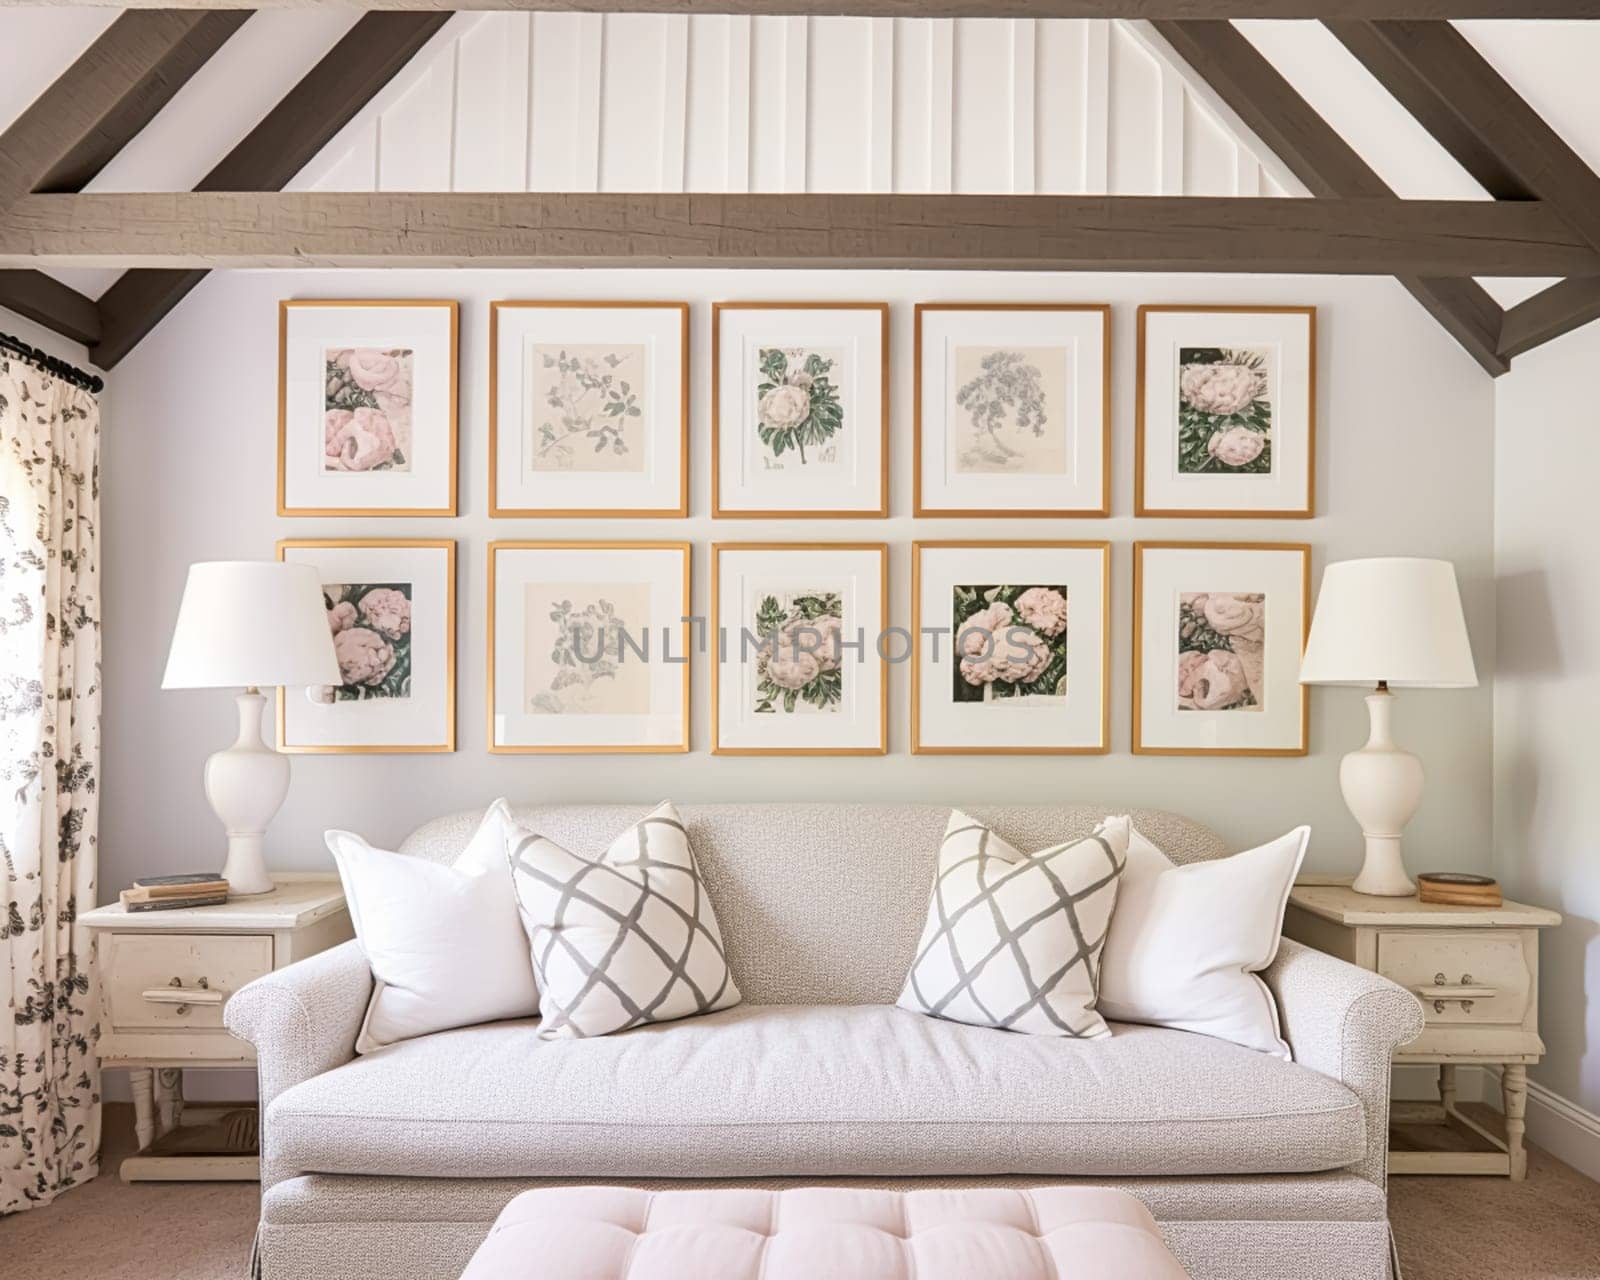 Living room gallery wall, home decor and wall art, framed art in the English country cottage interior, room for diy printable artwork mockup and print shop by Anneleven